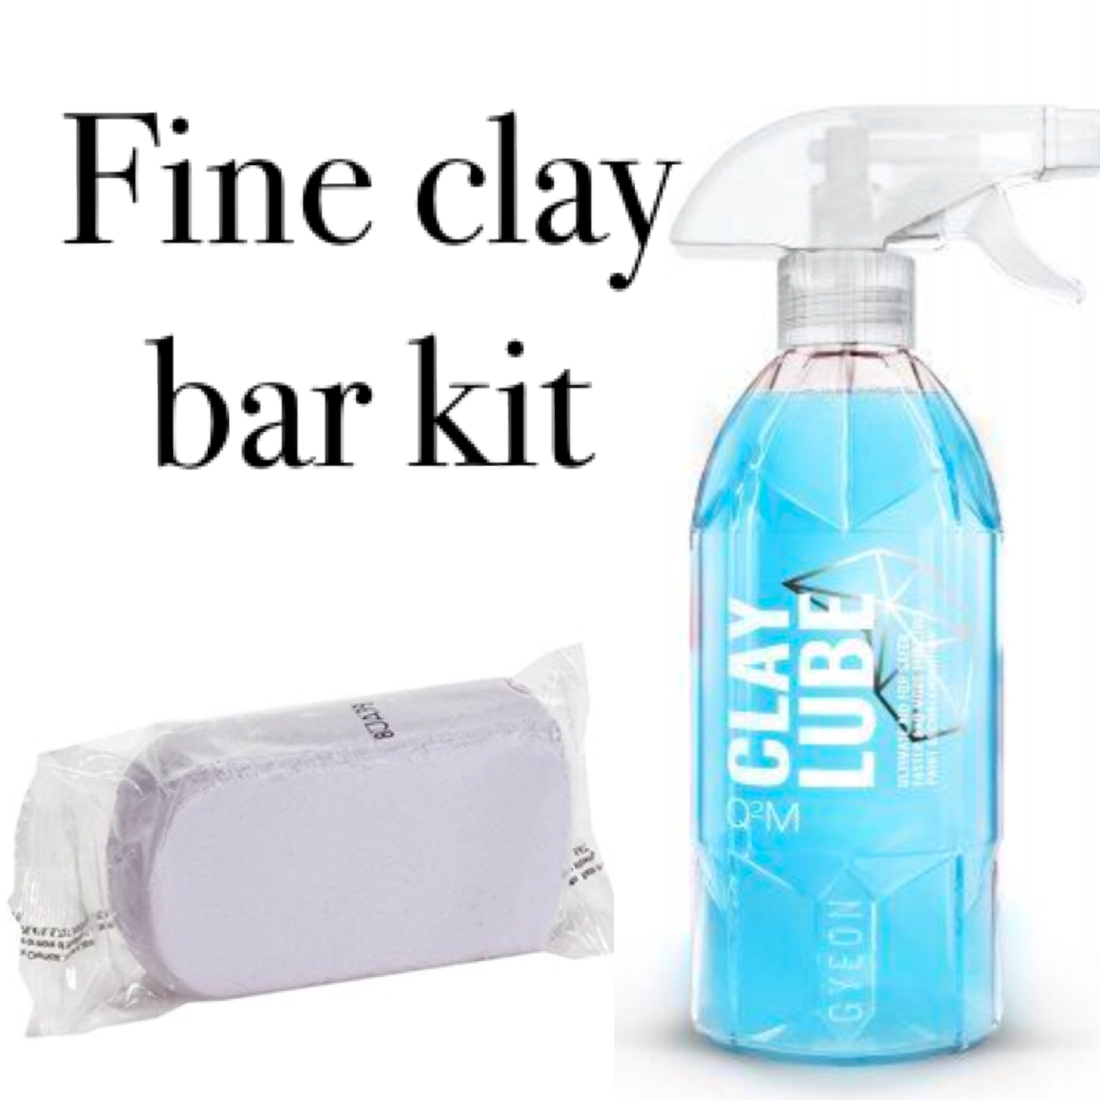 Fine Clay Bar Kit - Detailing Connect